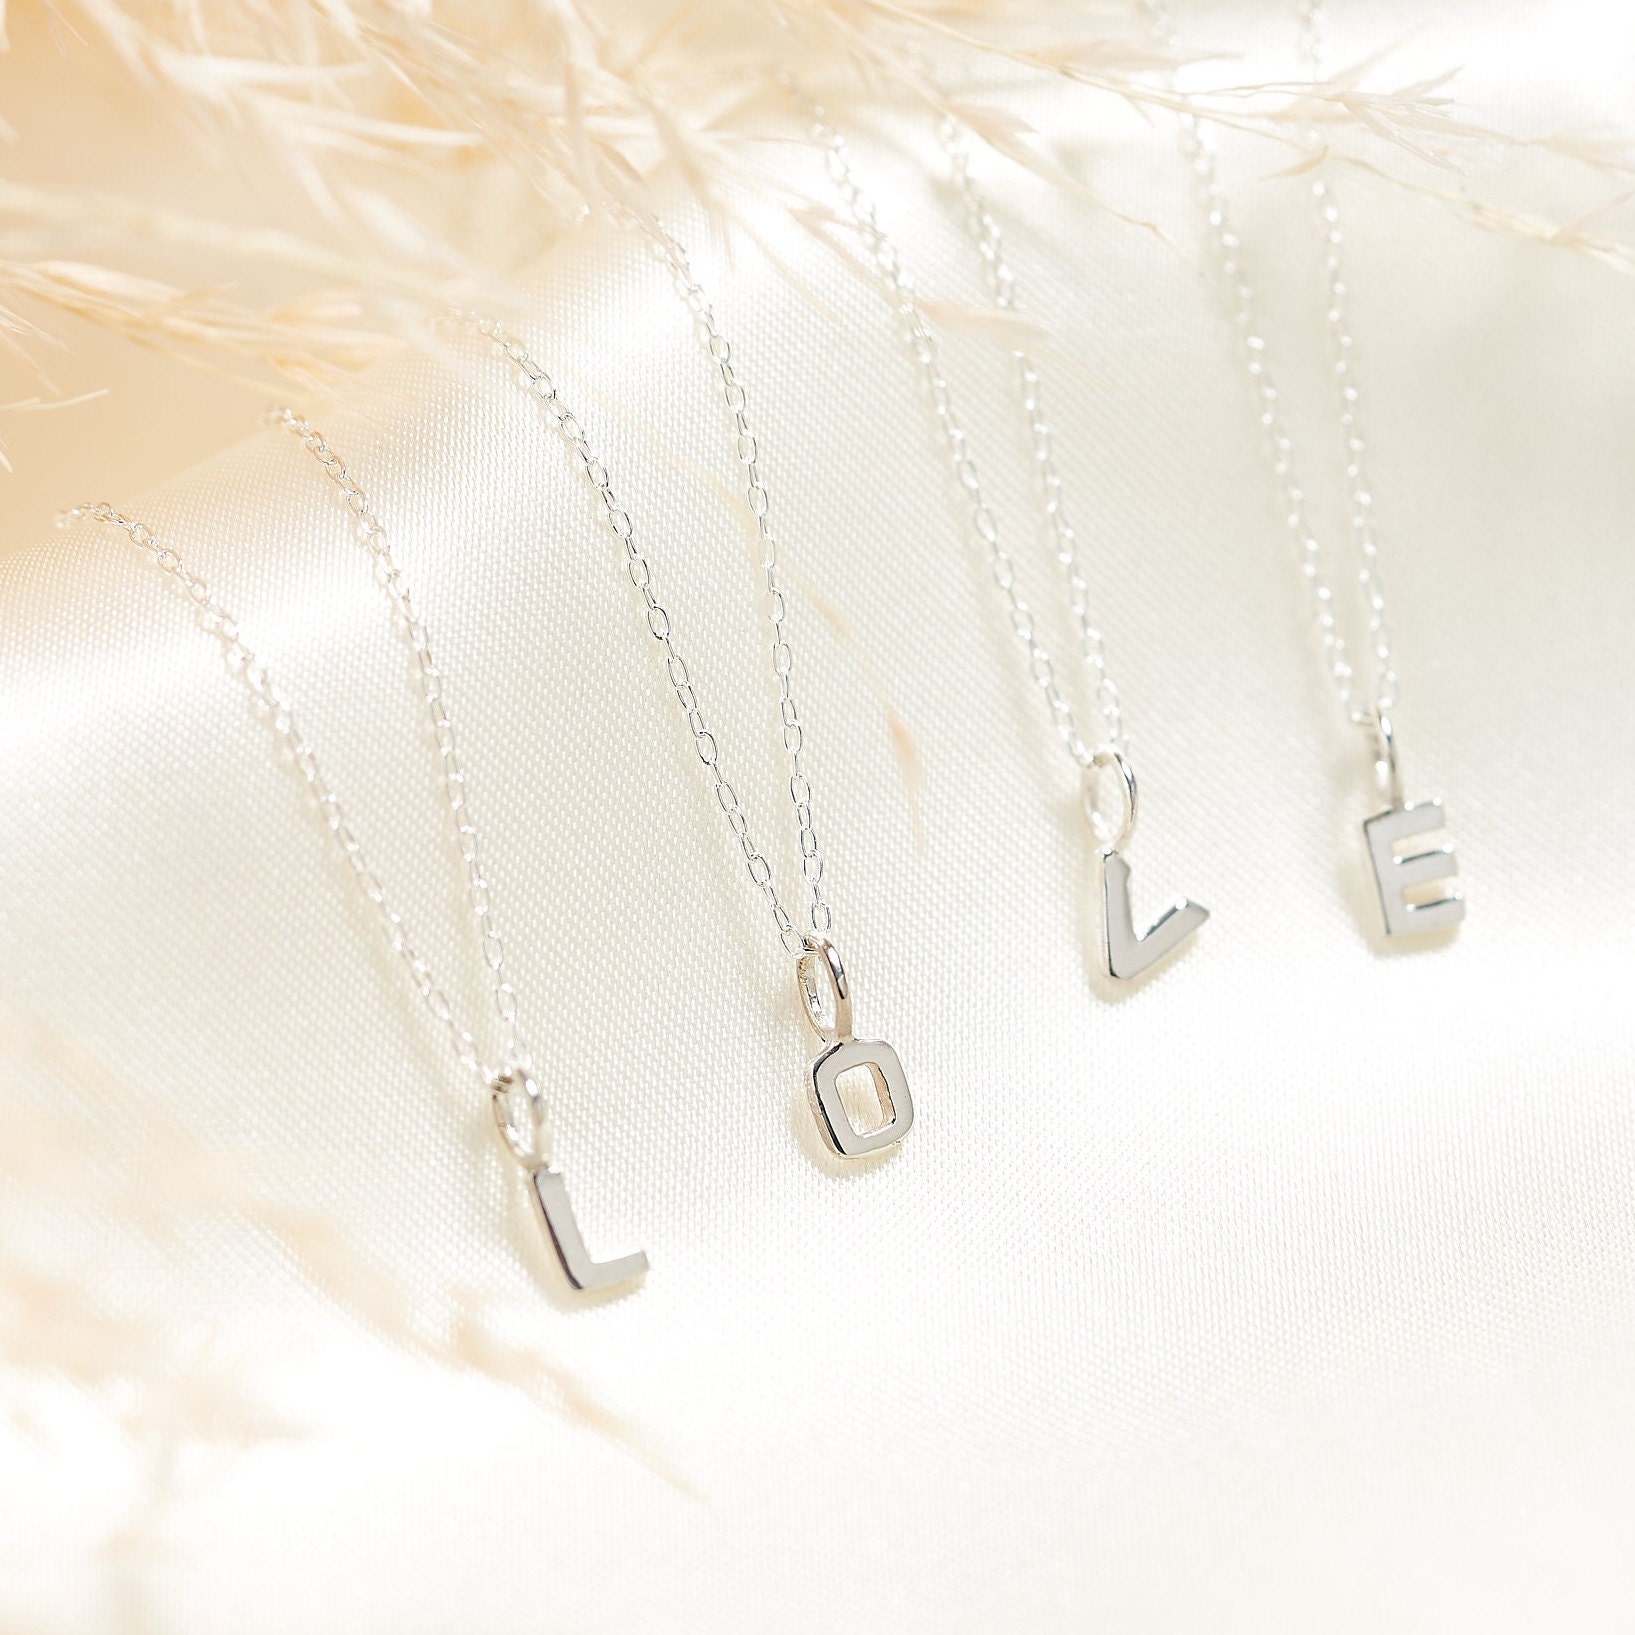 Chandi Ki Sexy Full Hd Video - Cute Alphabet Initial Sterling Silver Letter Necklace Gift - Etsy